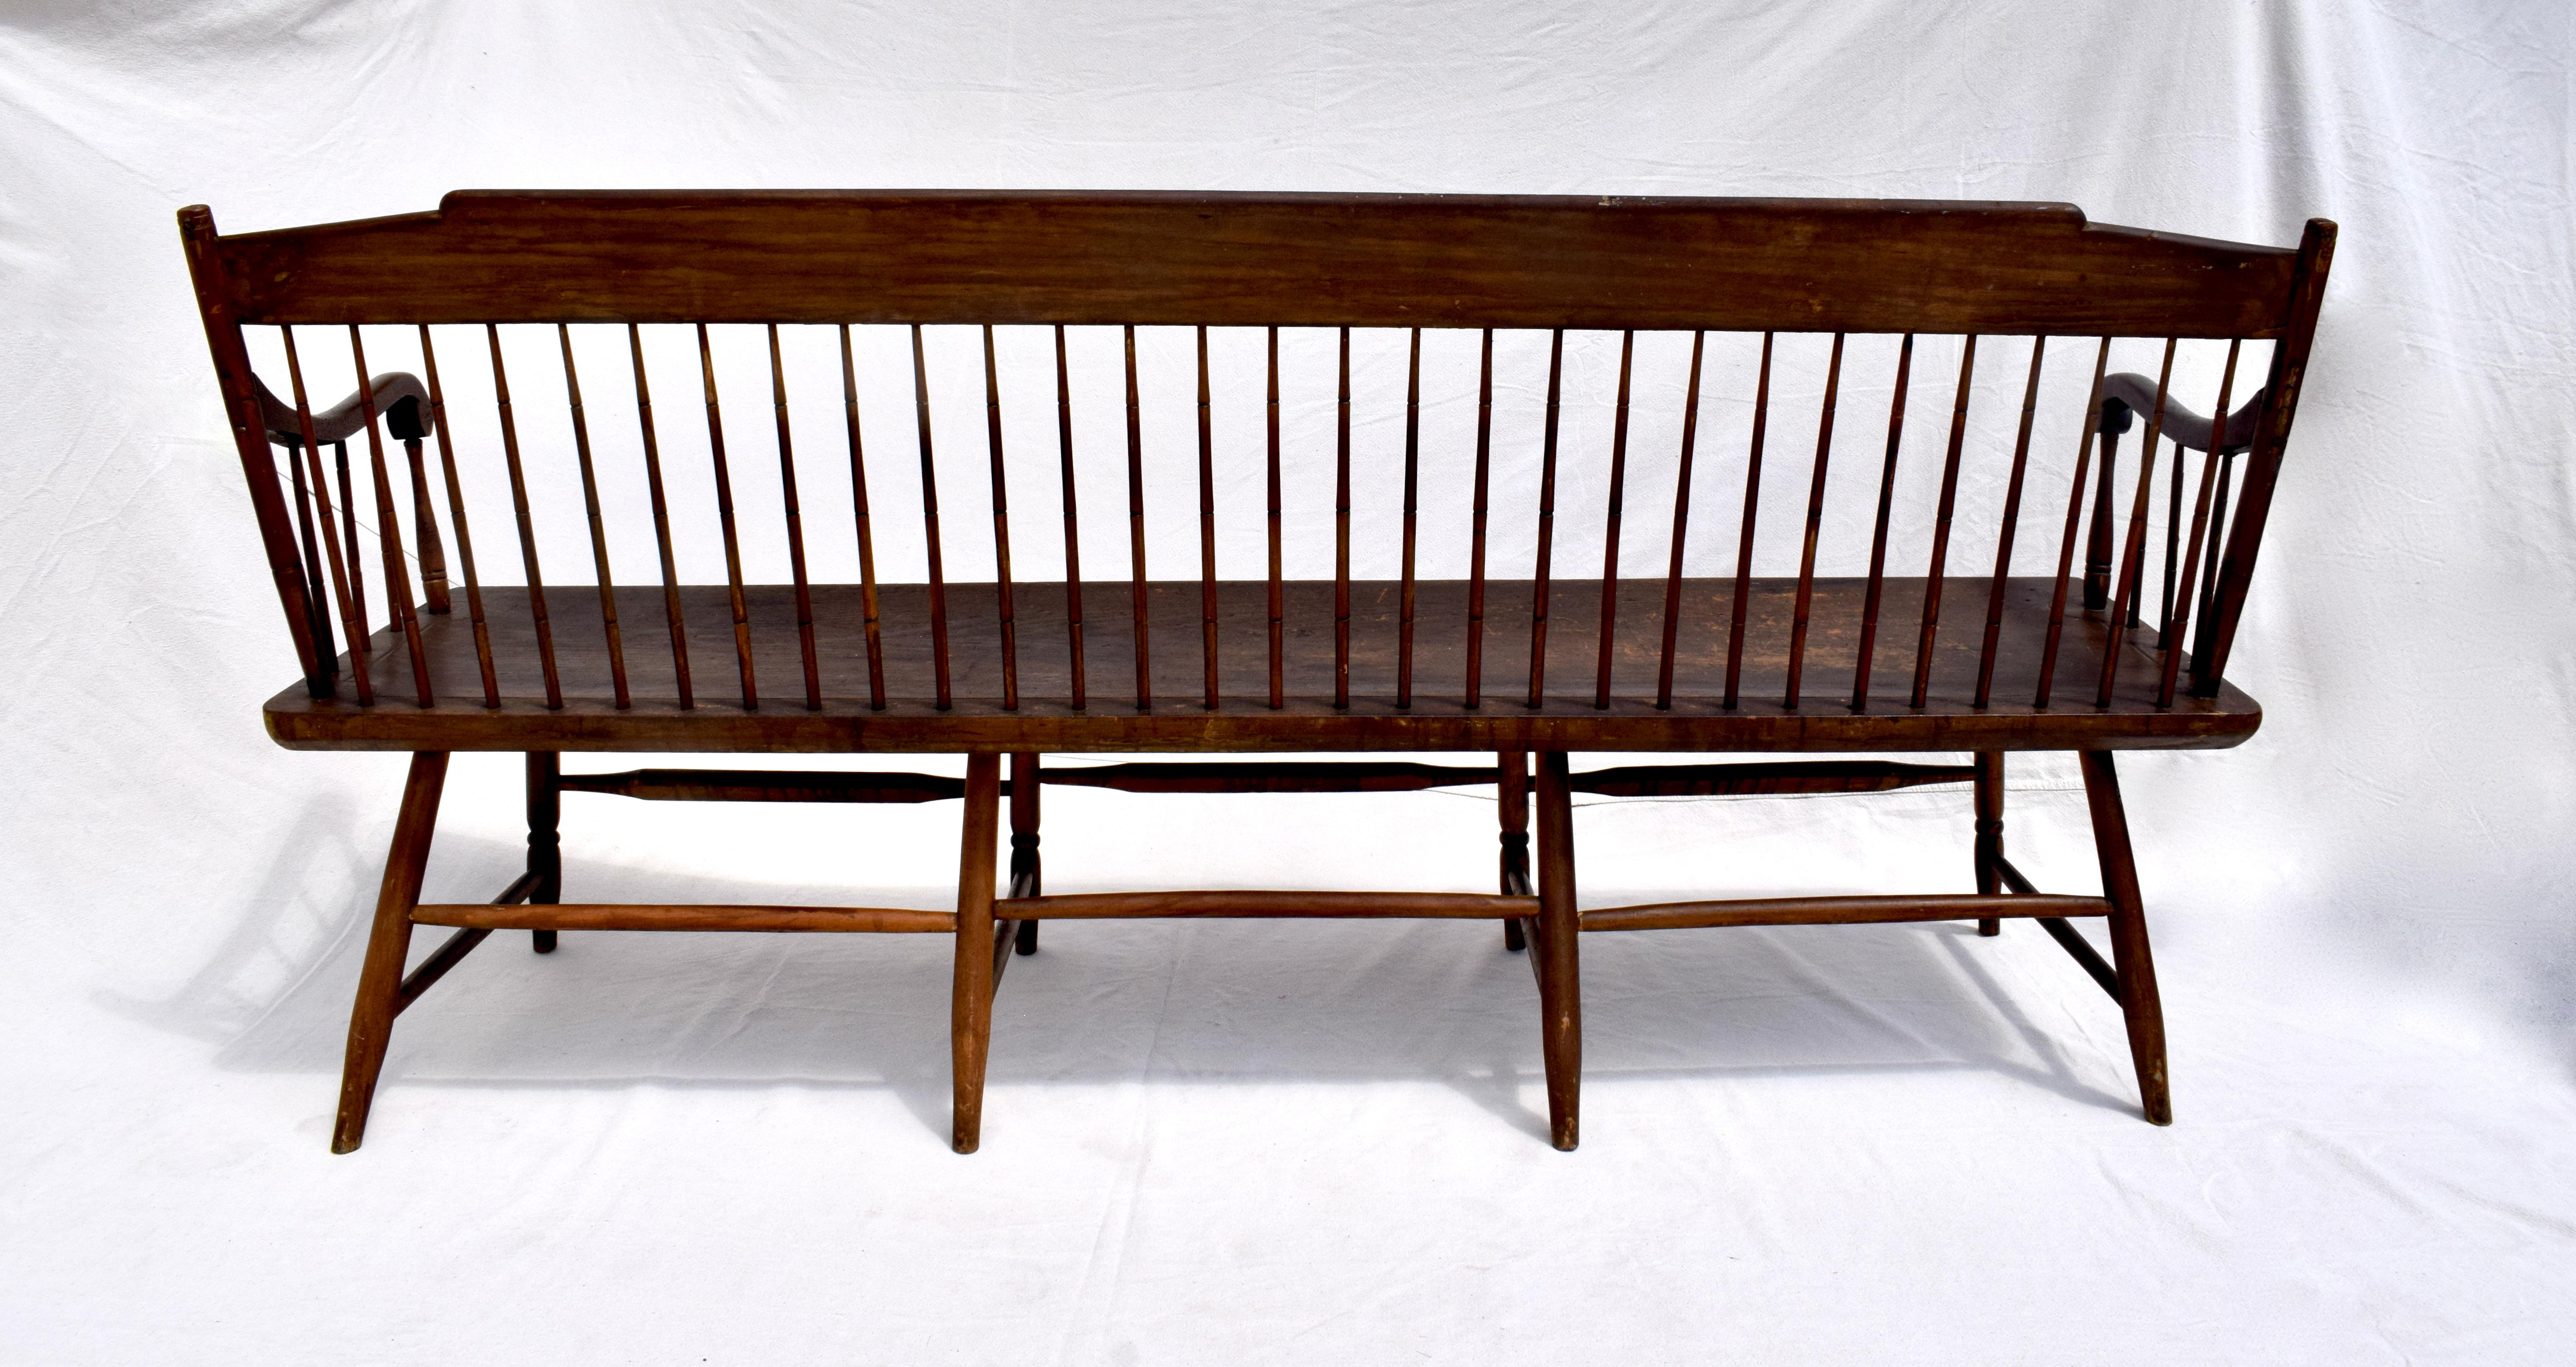 19th Century American Windsor Bench Early 19th C.